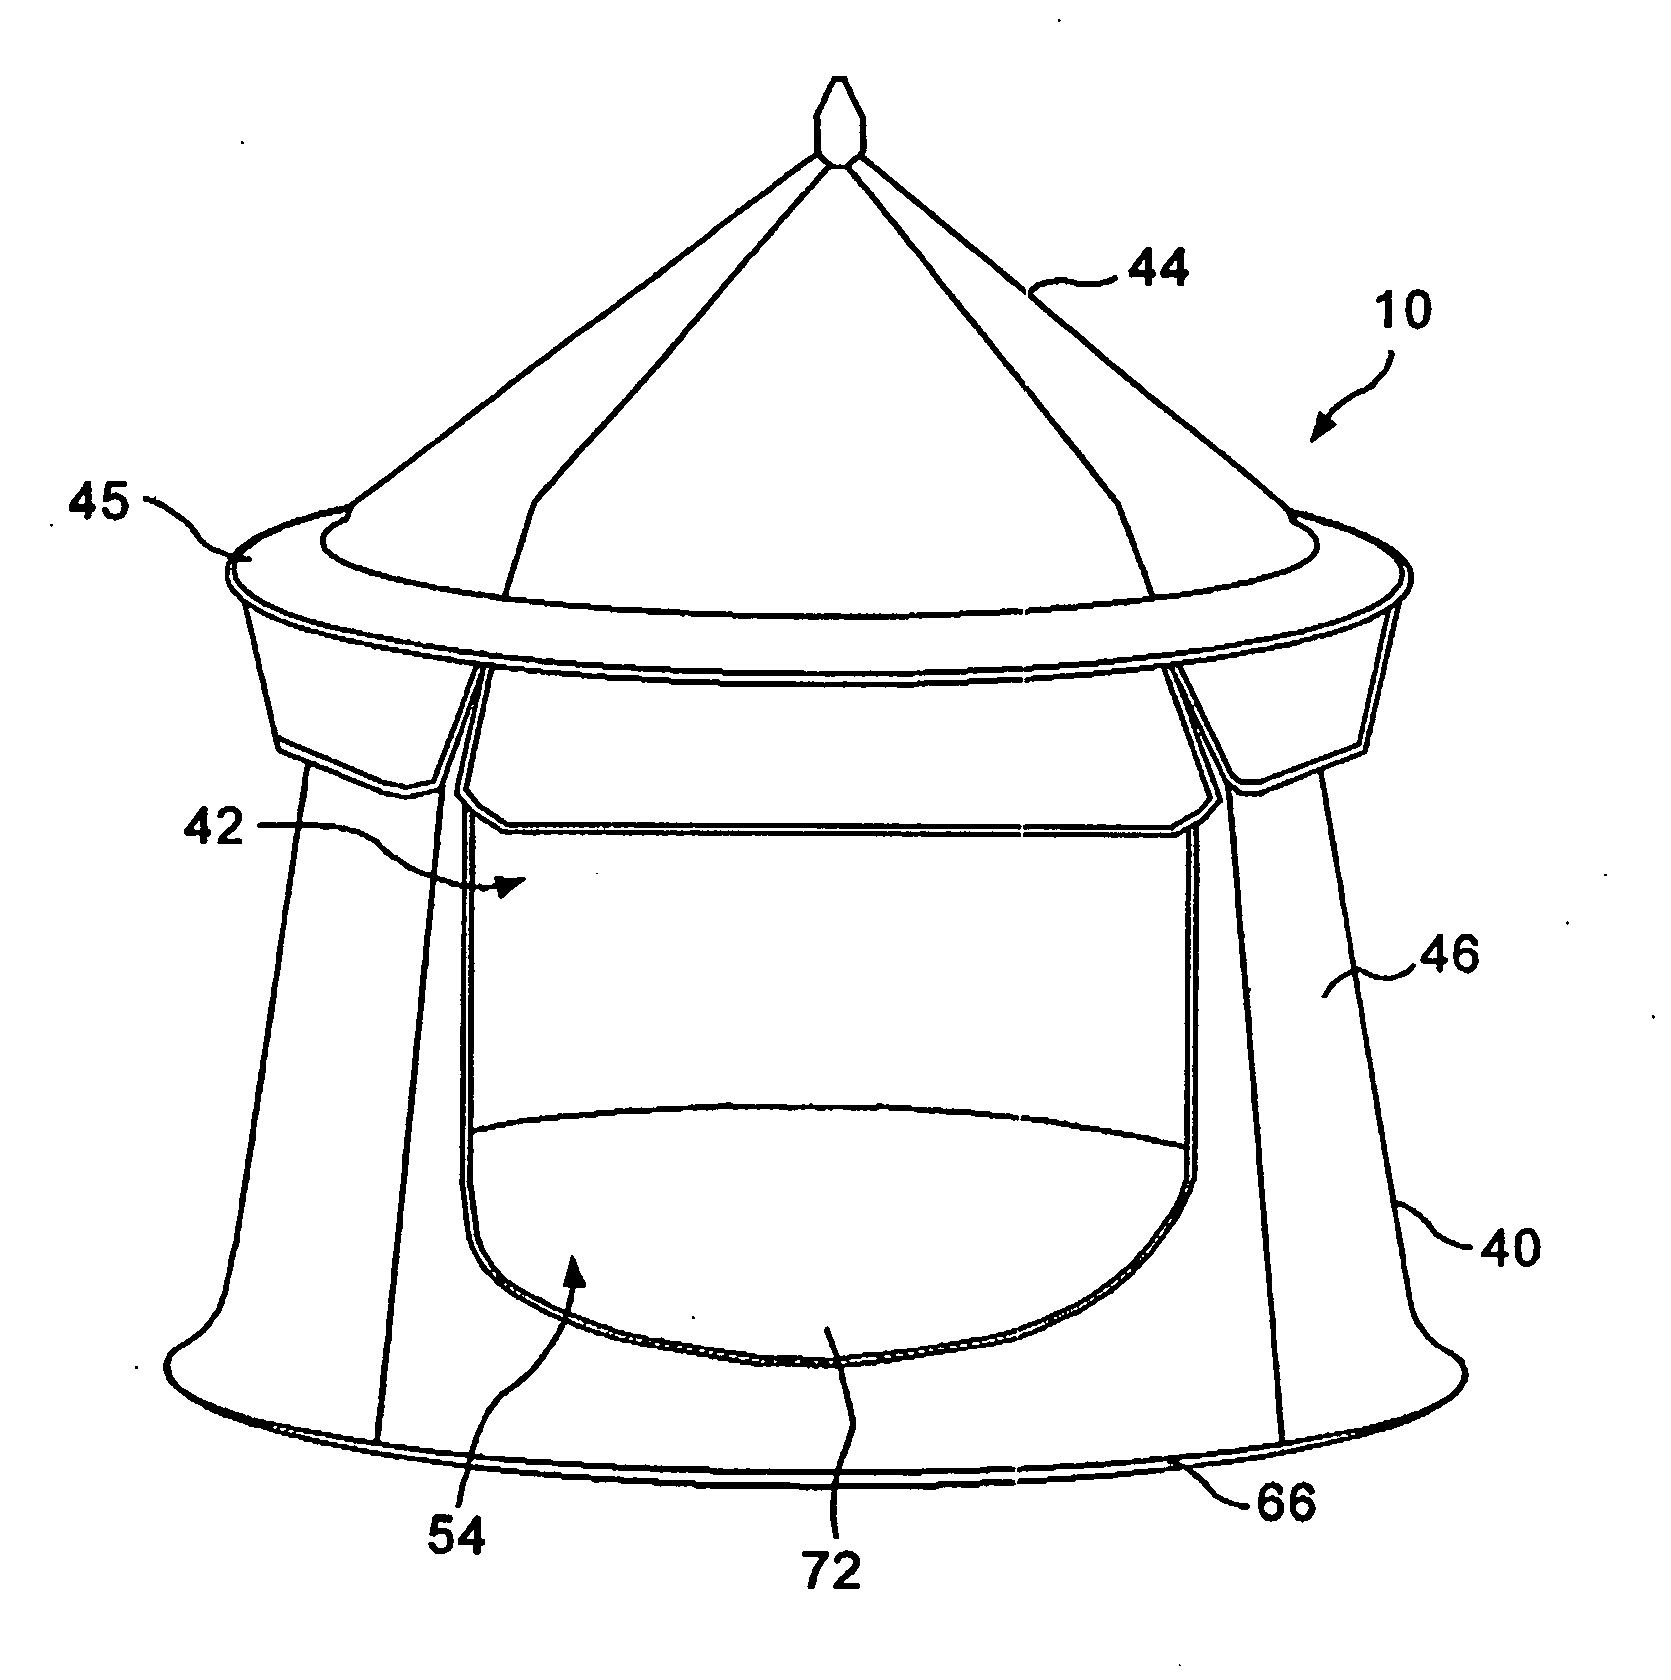 Collapsible portable shelter